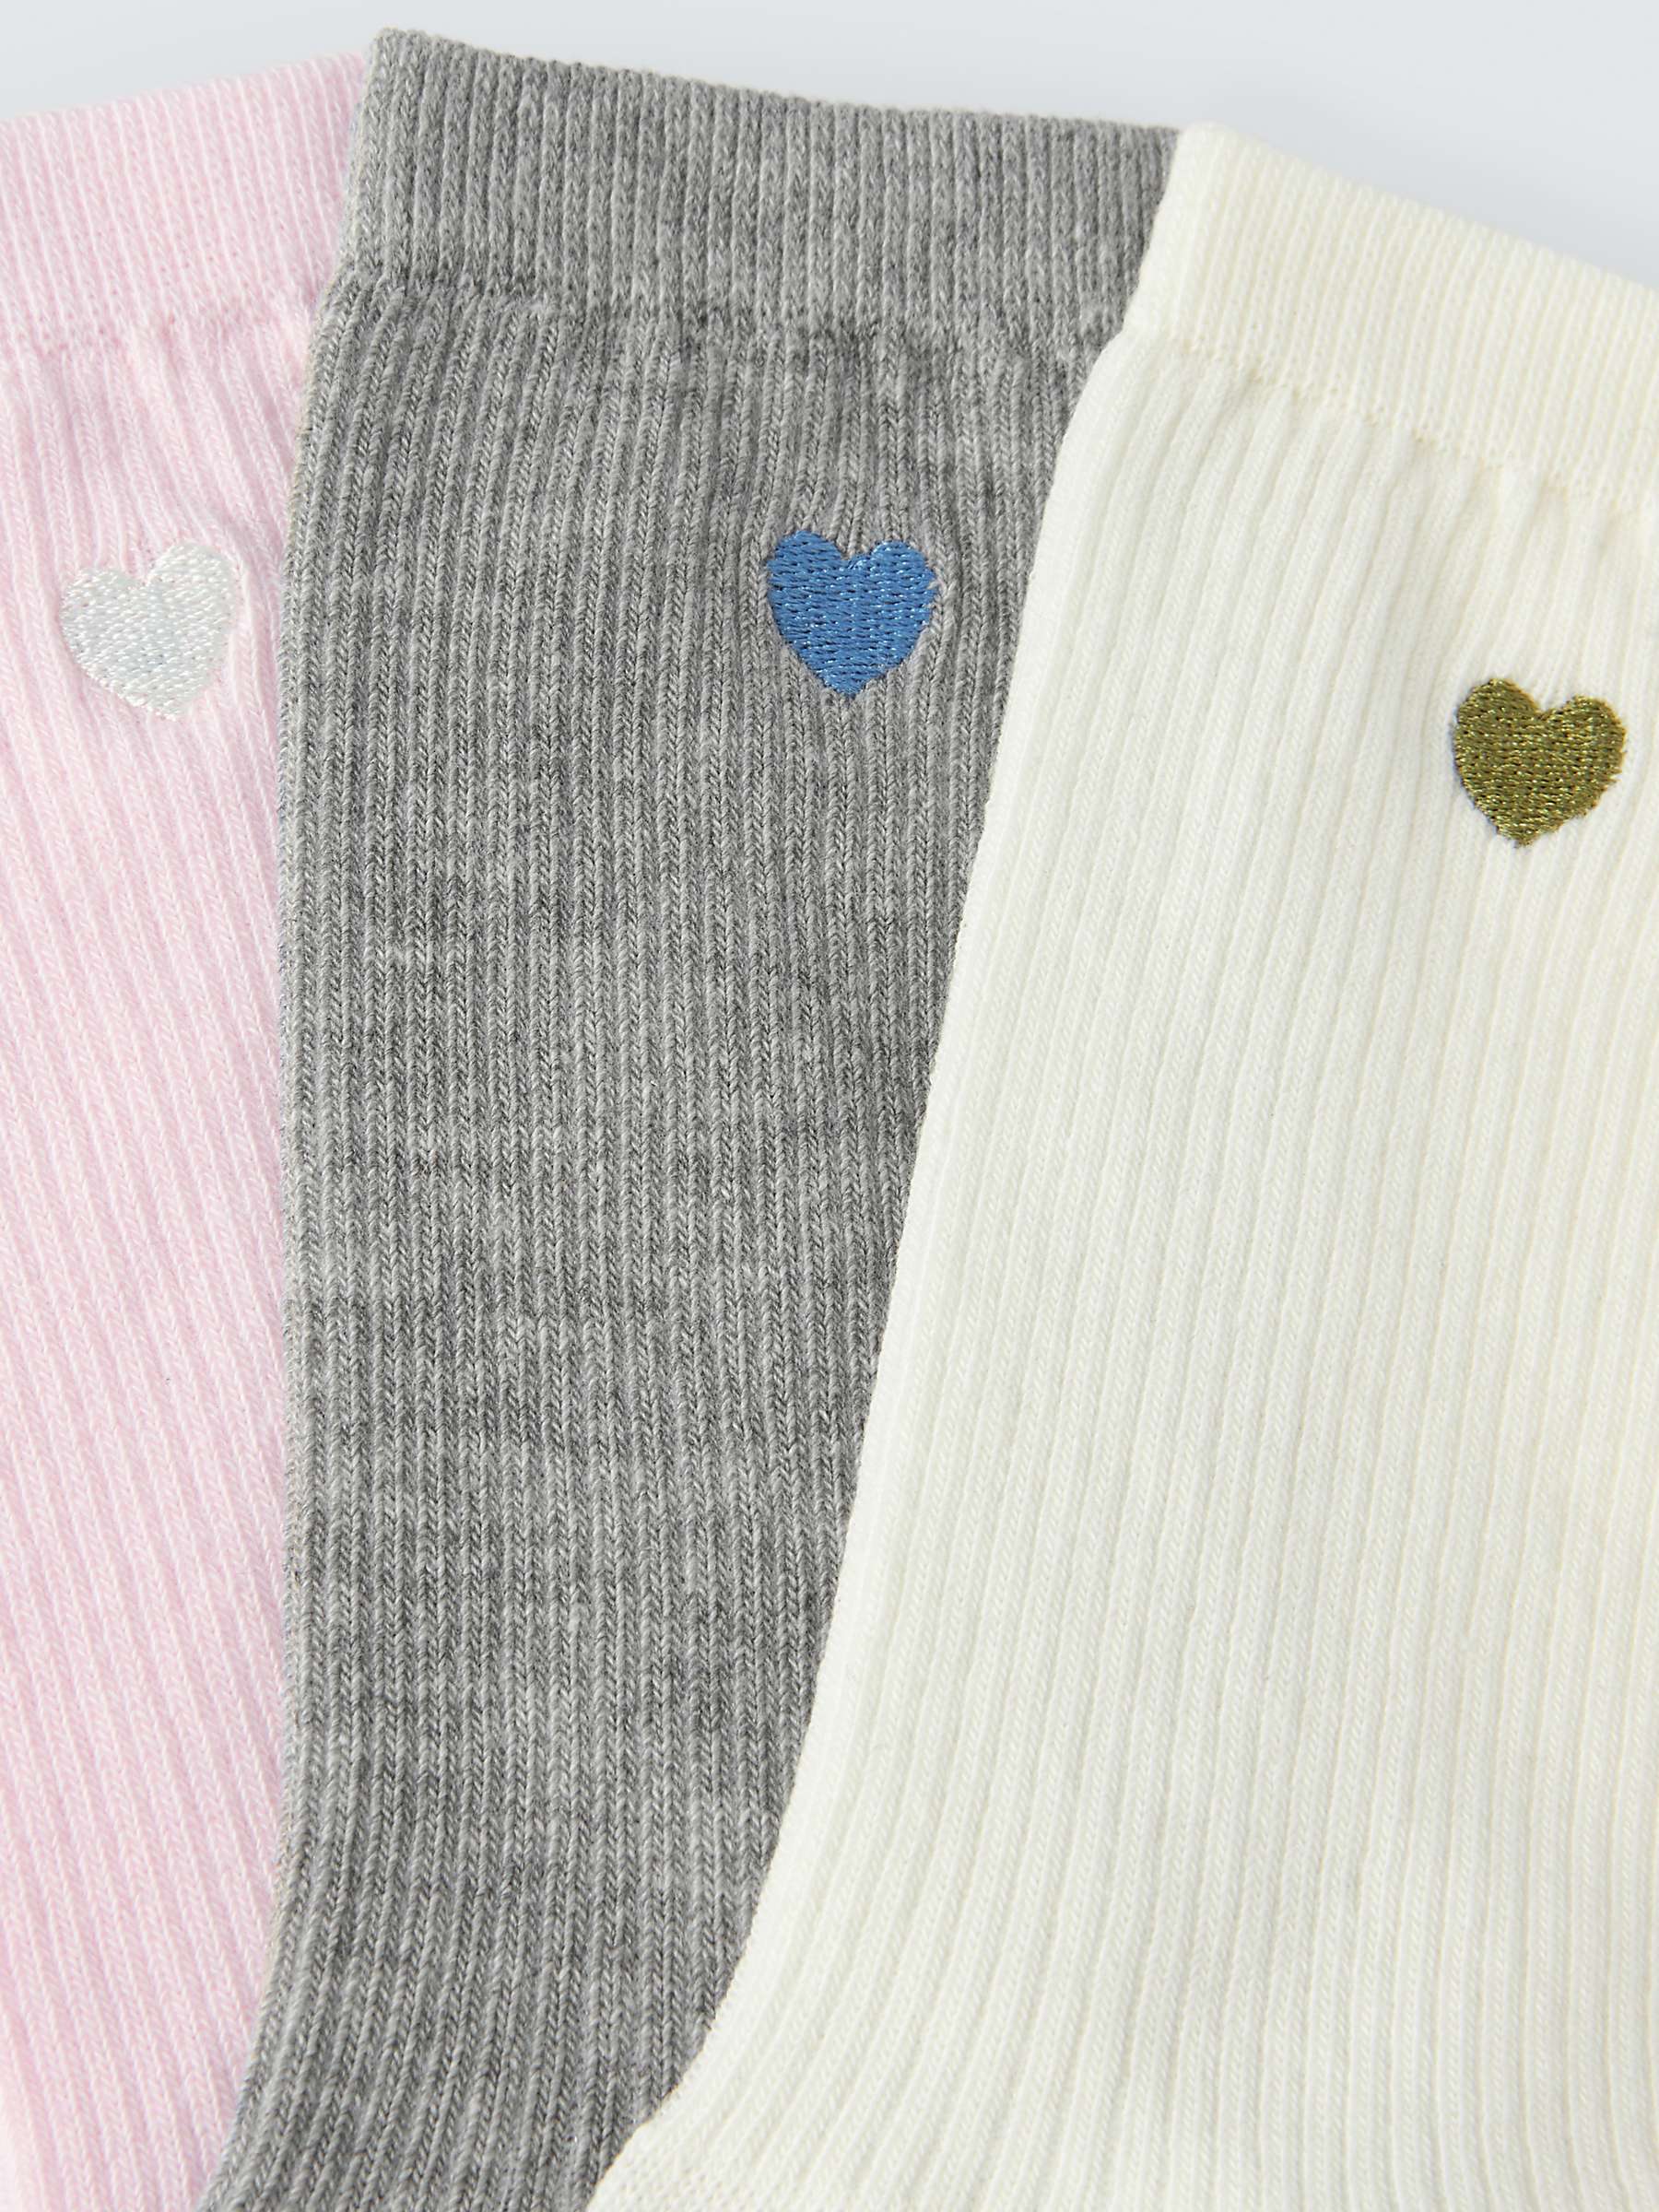 Buy John Lewis Embroidered Heart Ankle Socks, Pack of 3, Ivory/Pink Online at johnlewis.com